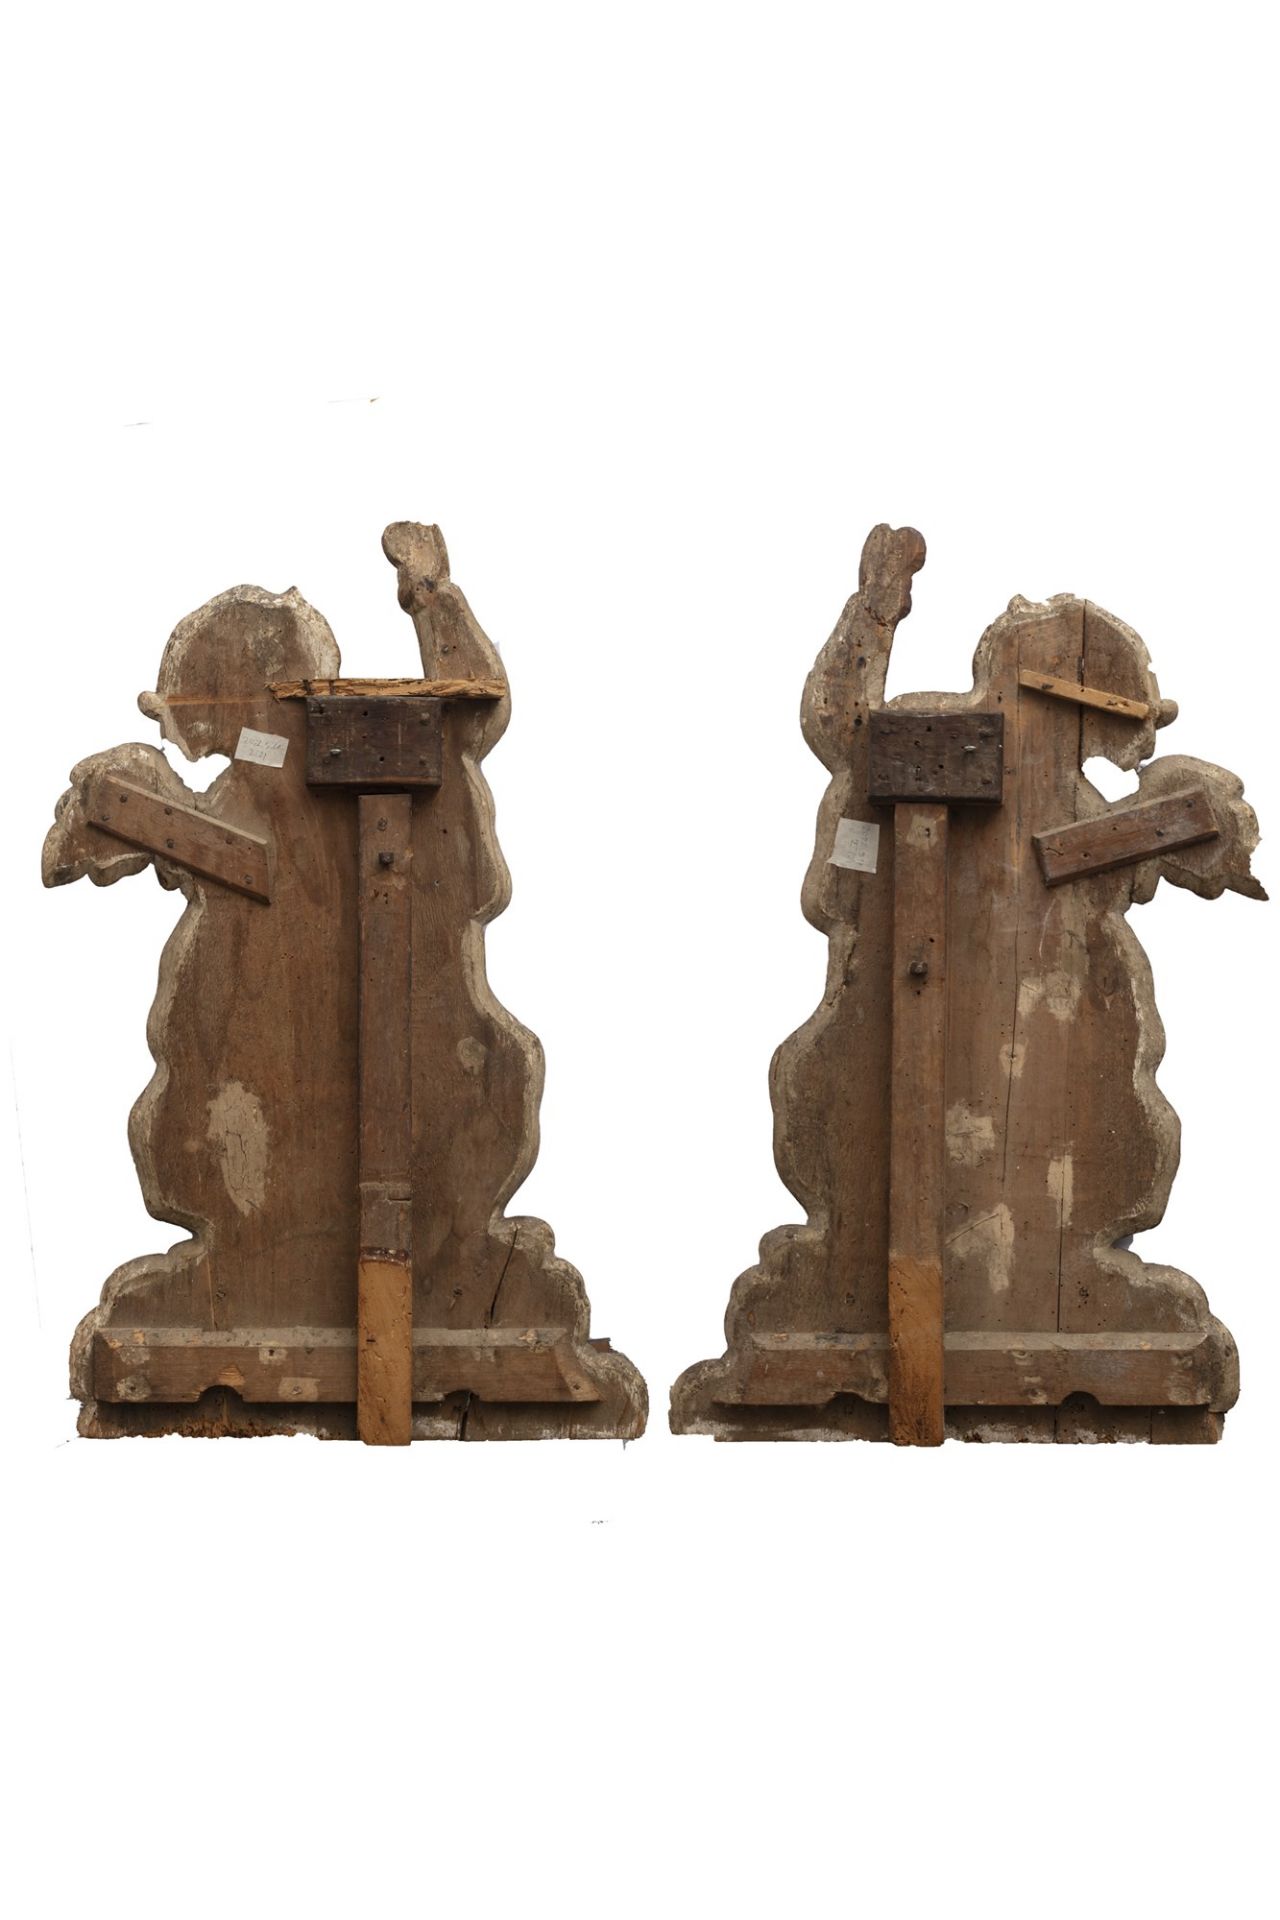 Pair of ancient polychrome wooden sculptures depicting angels - Image 2 of 4